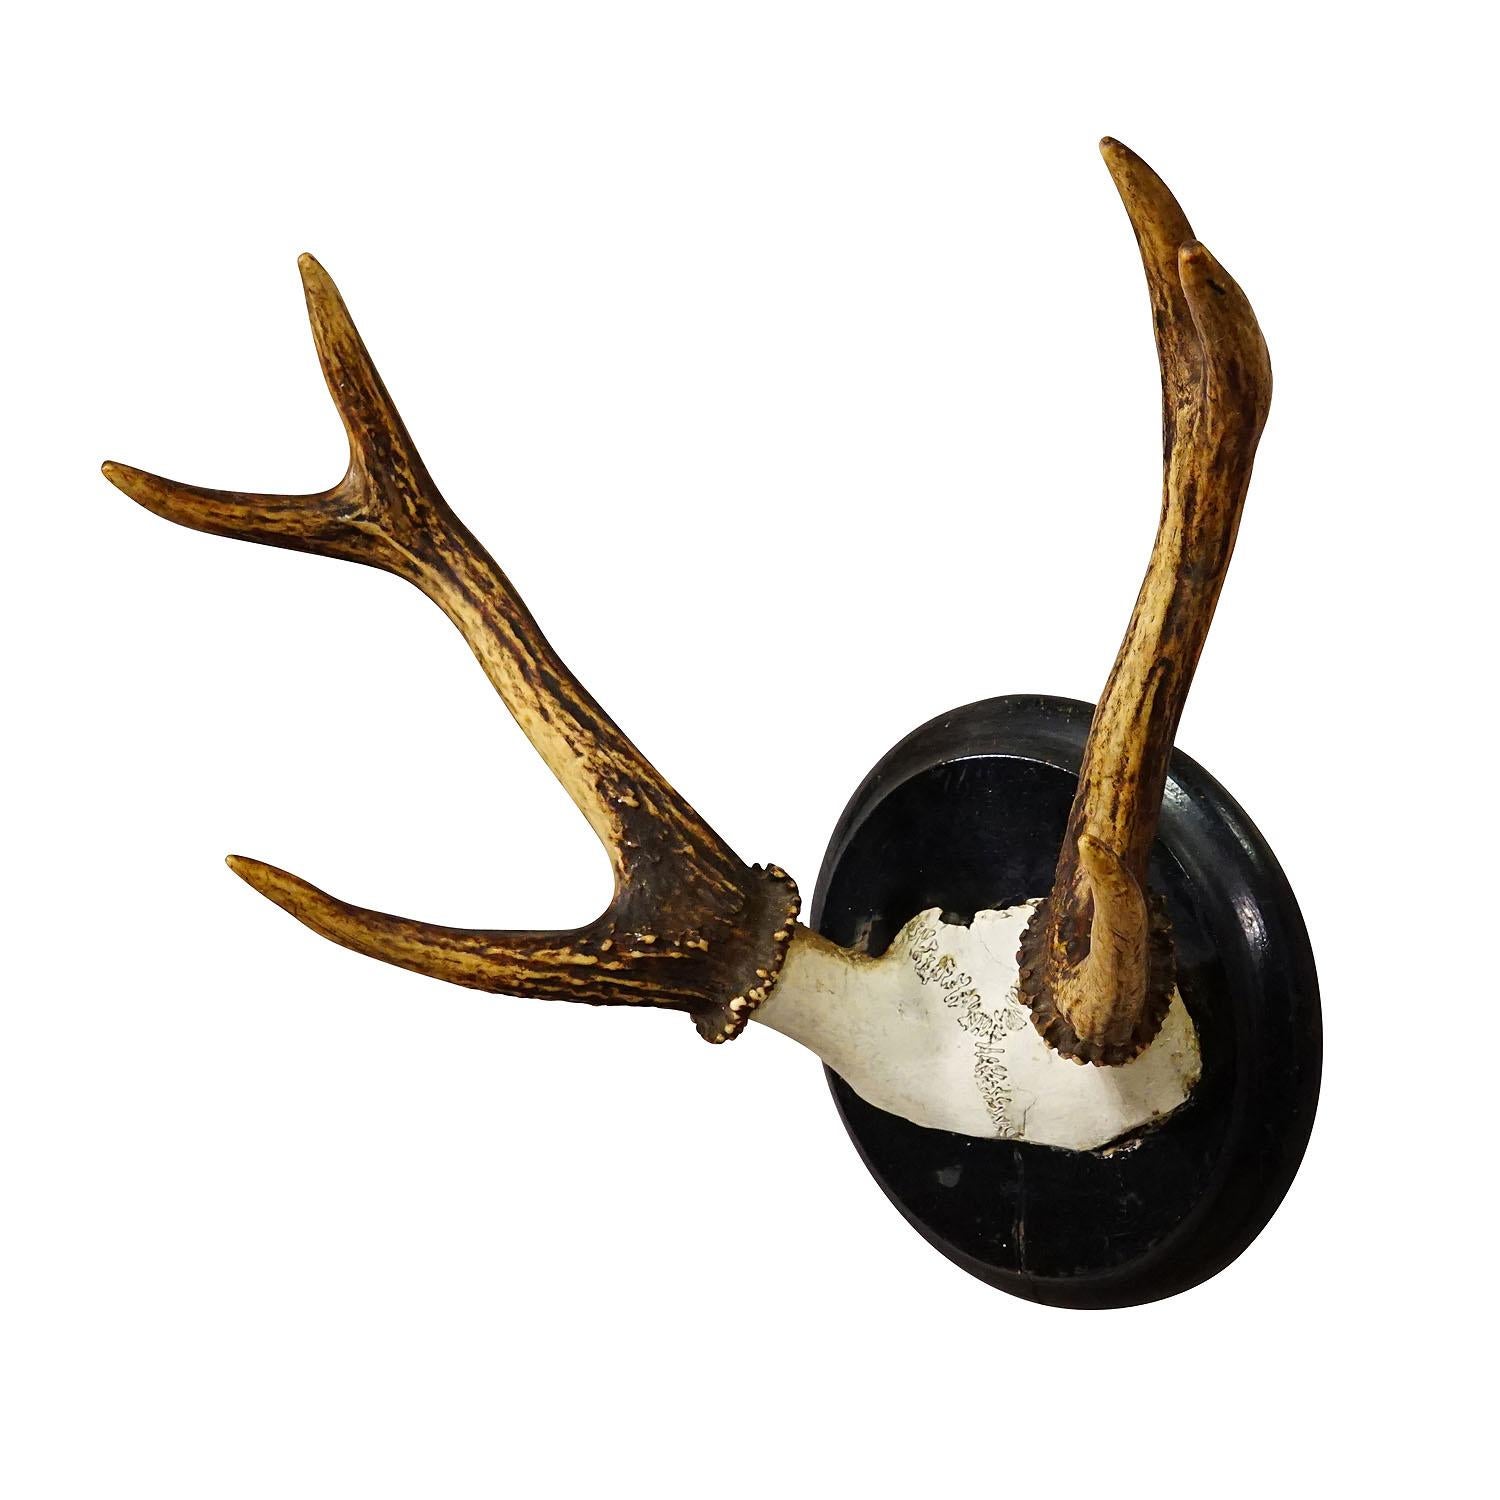 Antique Black Forest Deer Trophy on Wooden Plaque ca. 1900s

A great 6 pointer deer (Cervus elaphus) trophy from the Black Forest shot in Germany around 1900. The antlers are mounted on a turned wall plaque with black finish.

Trophies are mementos